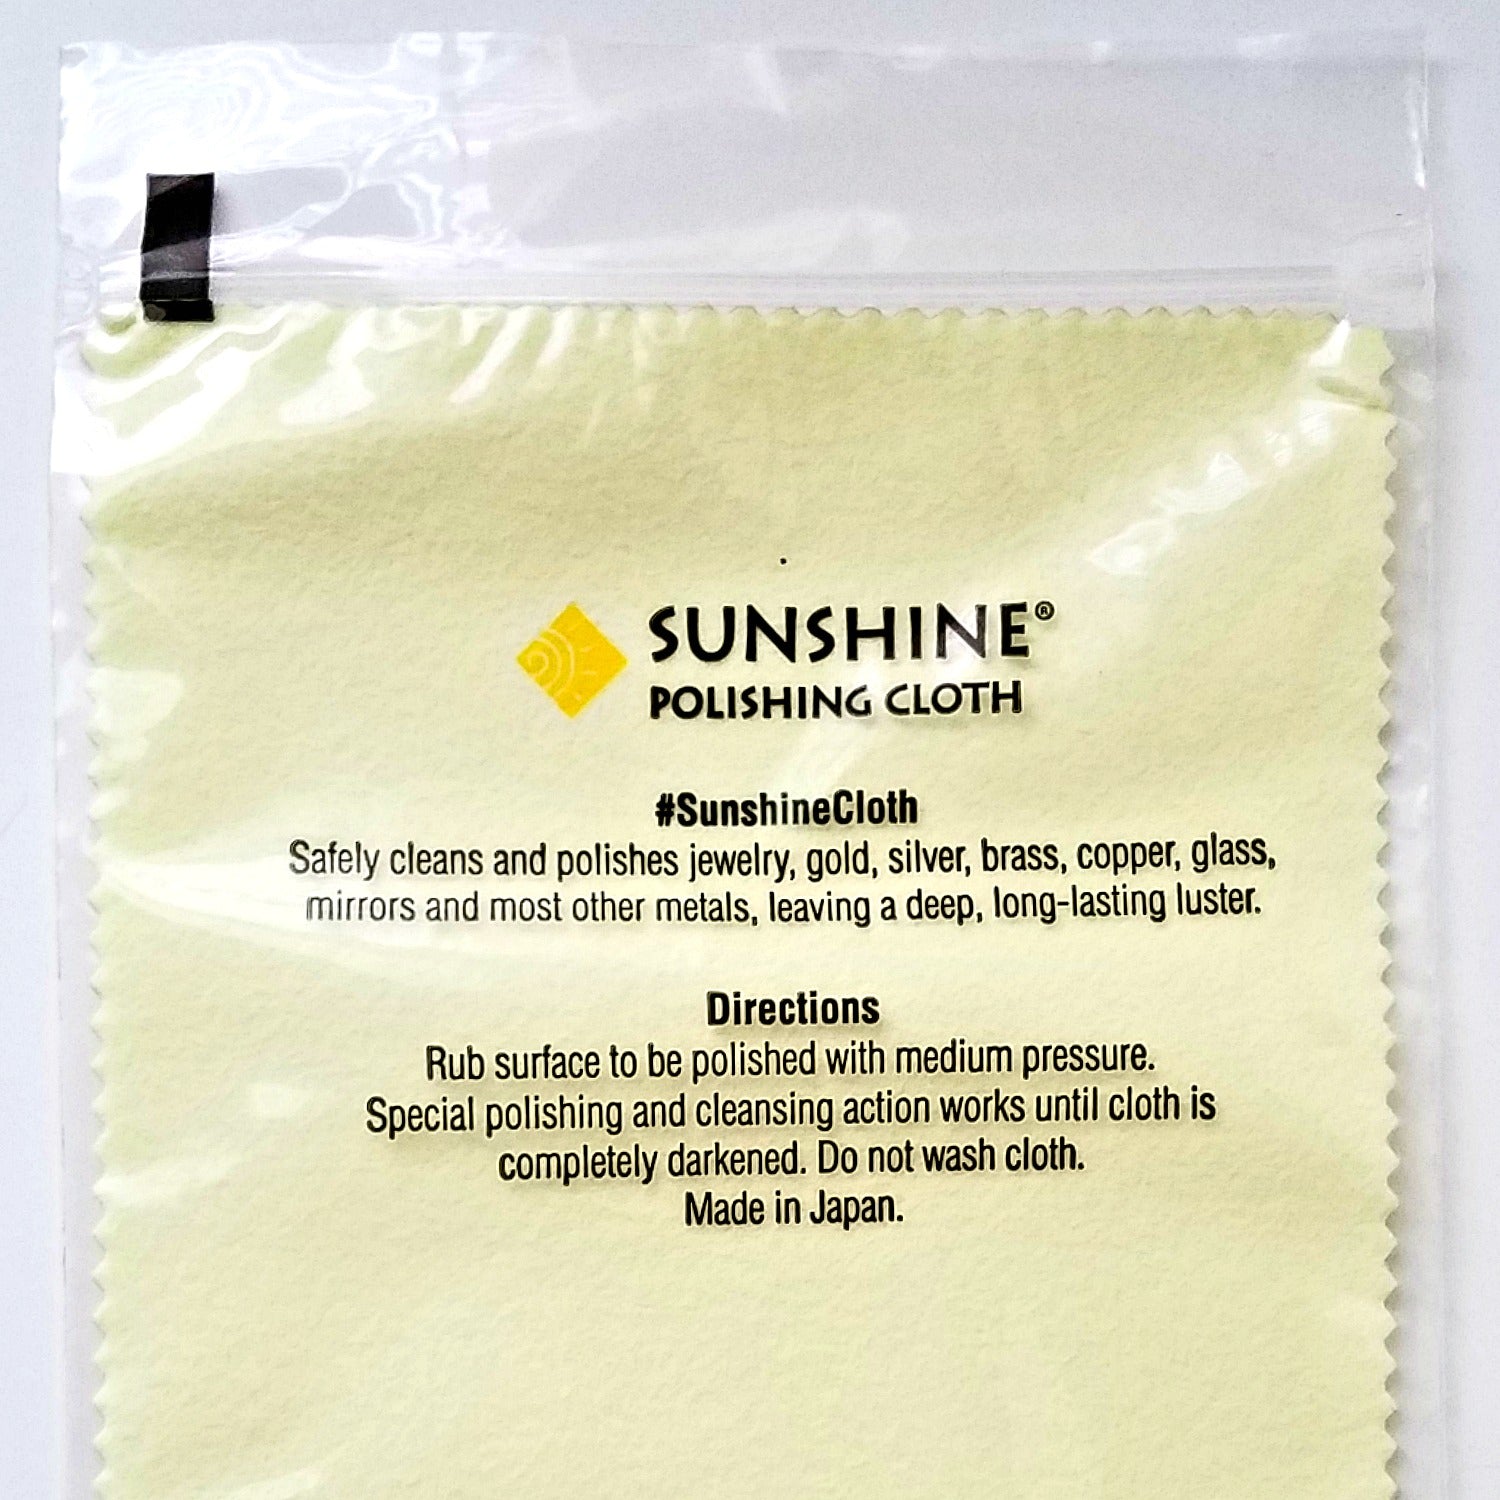 SUNSHINE POLISHING CLOTH - 1 Sunshine Polishing Cloth for us